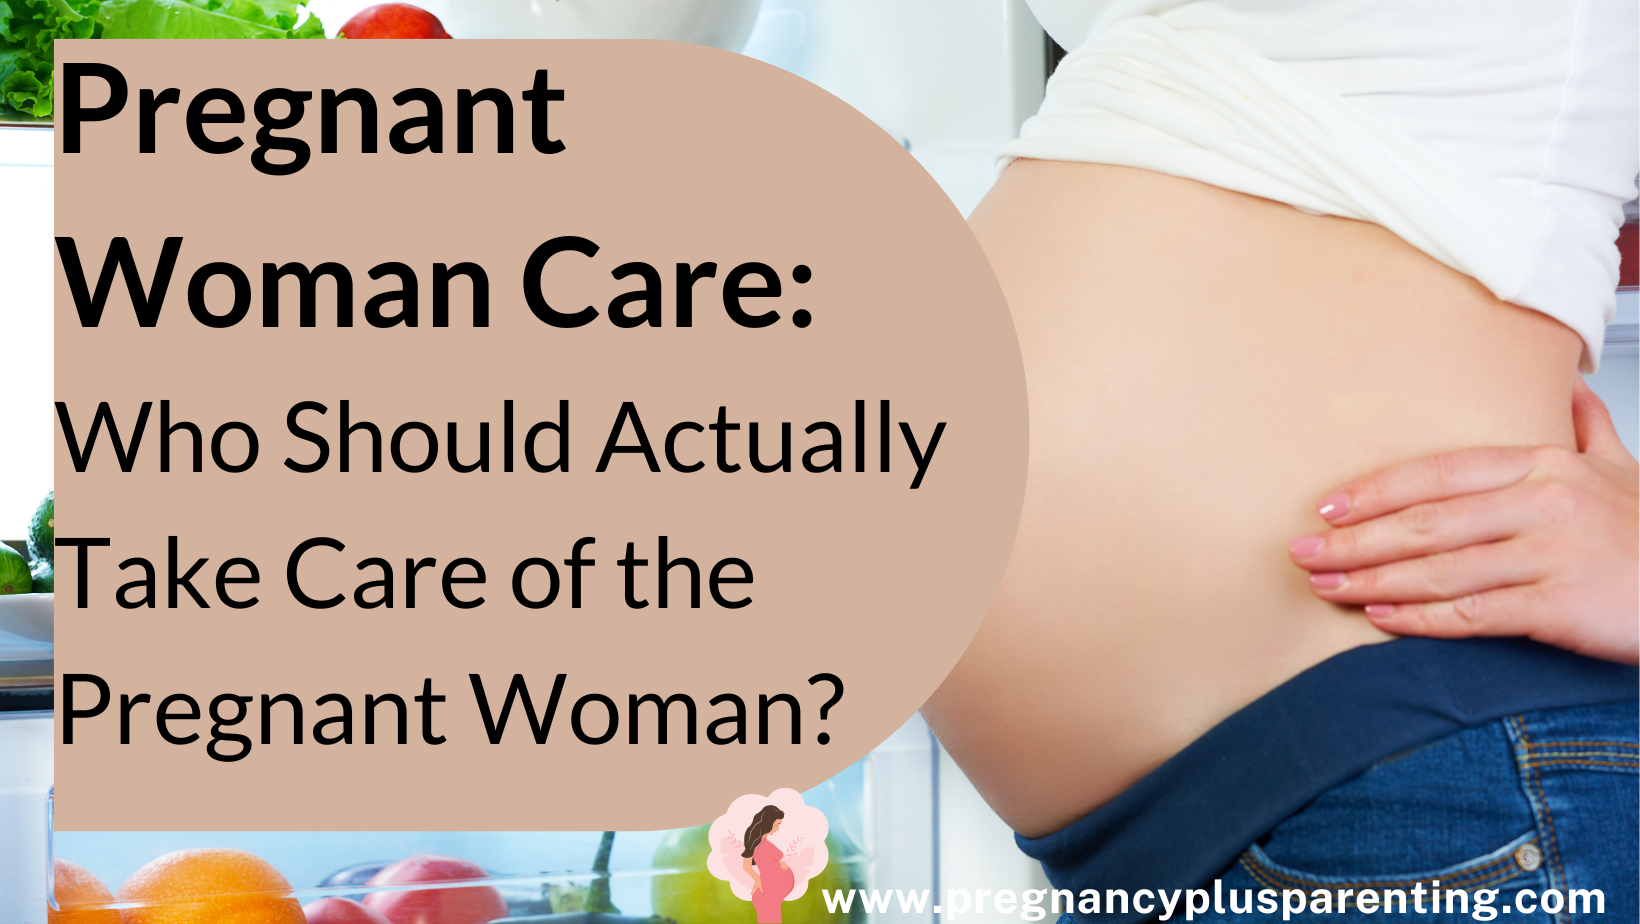 Pregnant Woman Care: Who Should Actually Take Care of the Pregnant Woman?